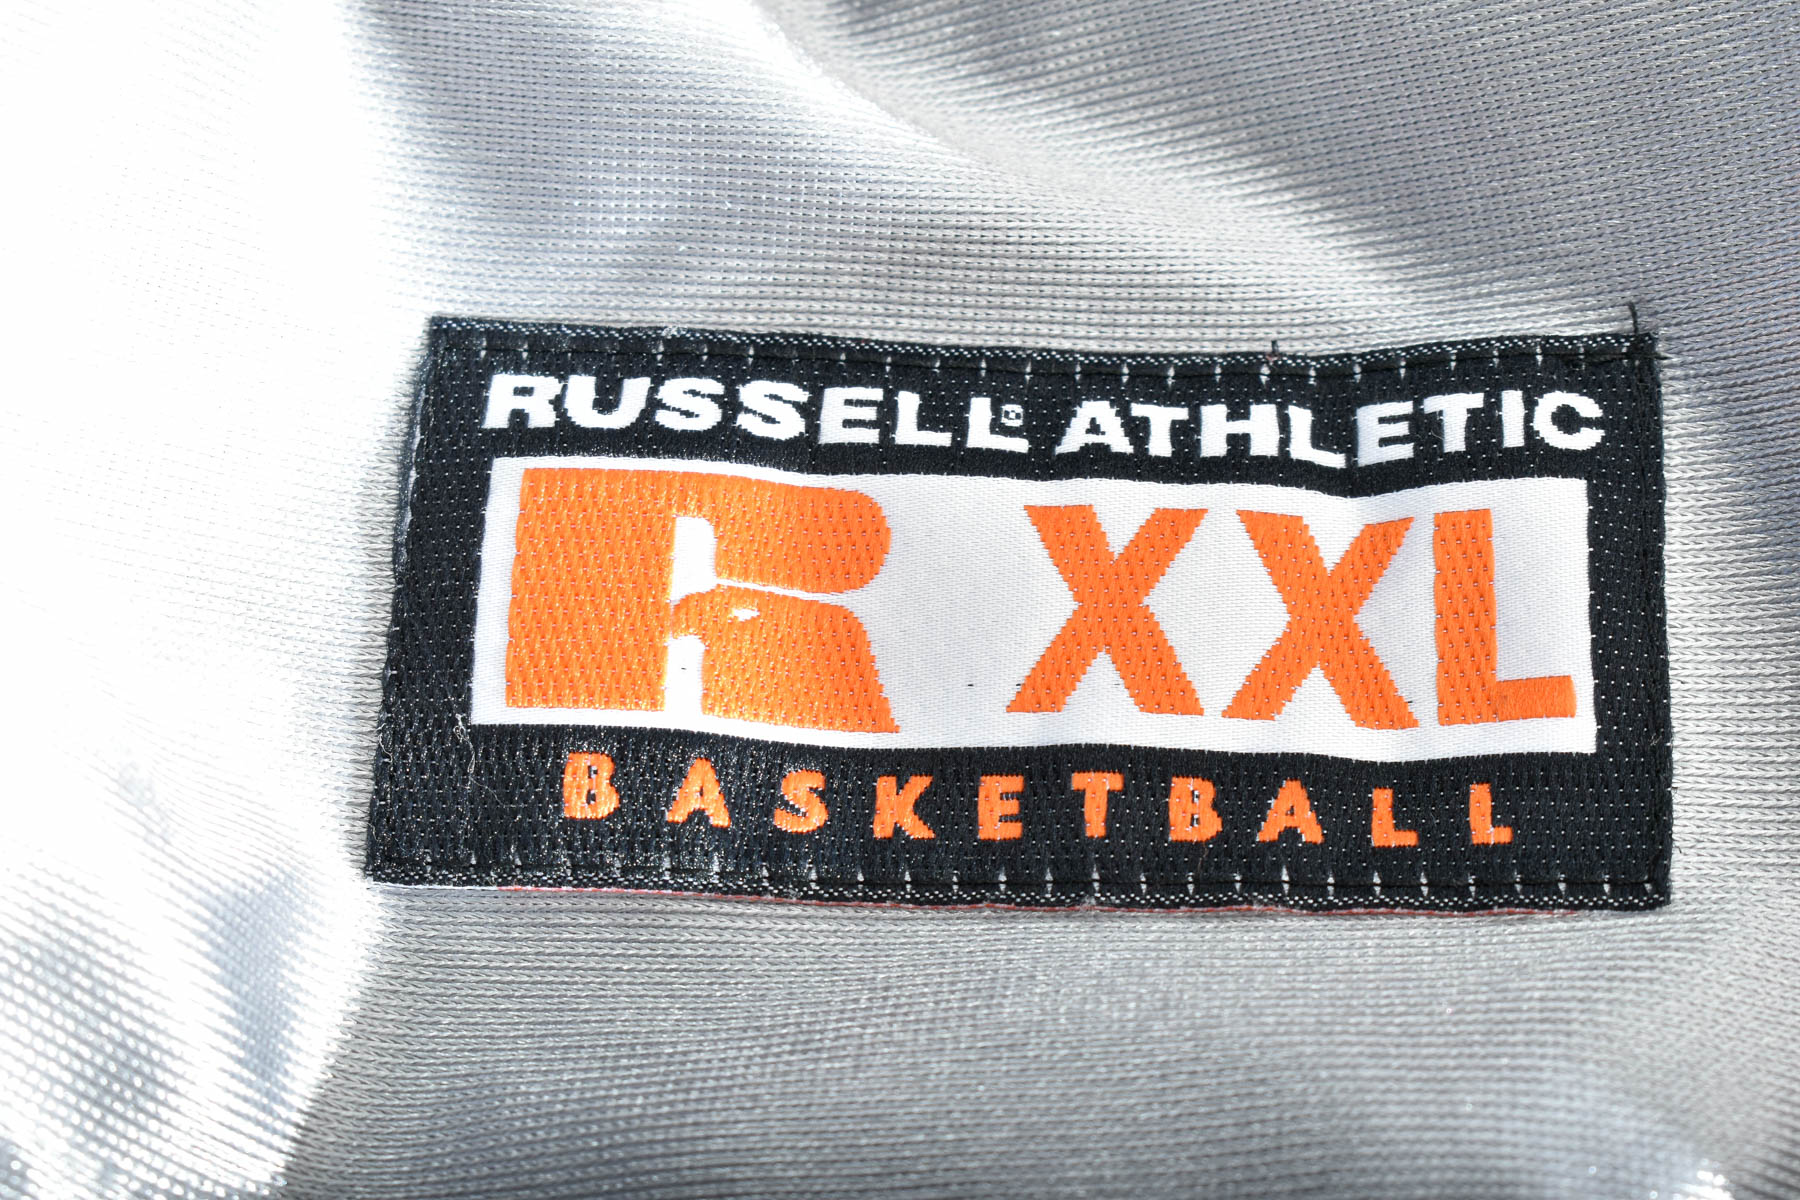 Boy's top reversible - Russell Athletic - 4